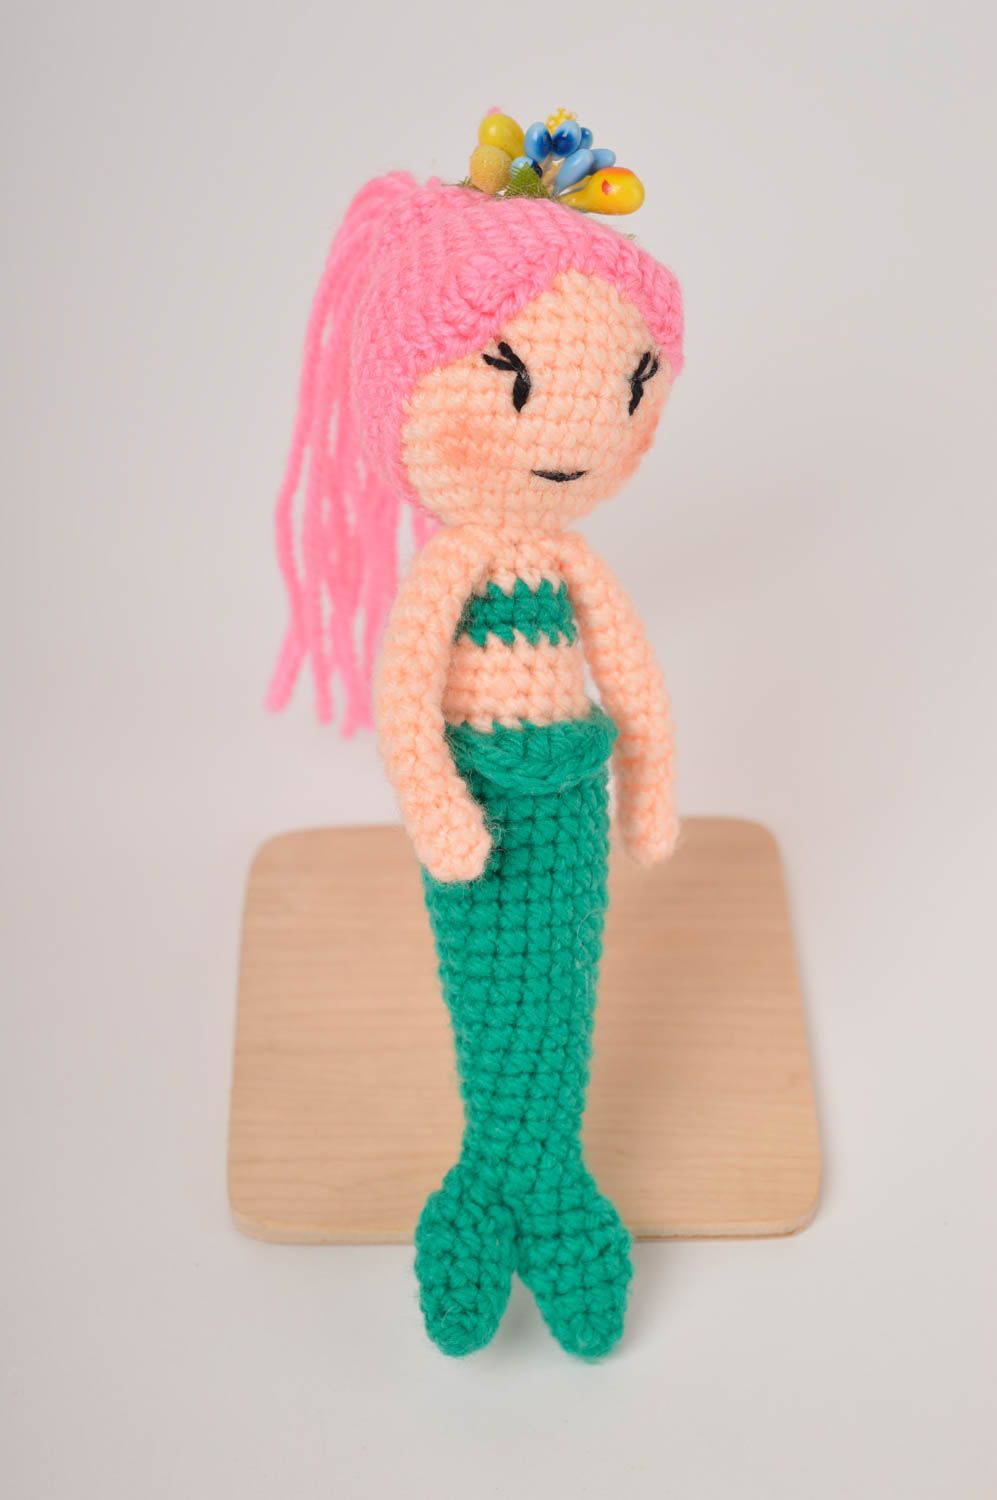 Little mermaid stuffed knitted toy in pink and green colors. 7 inches tall photo 2